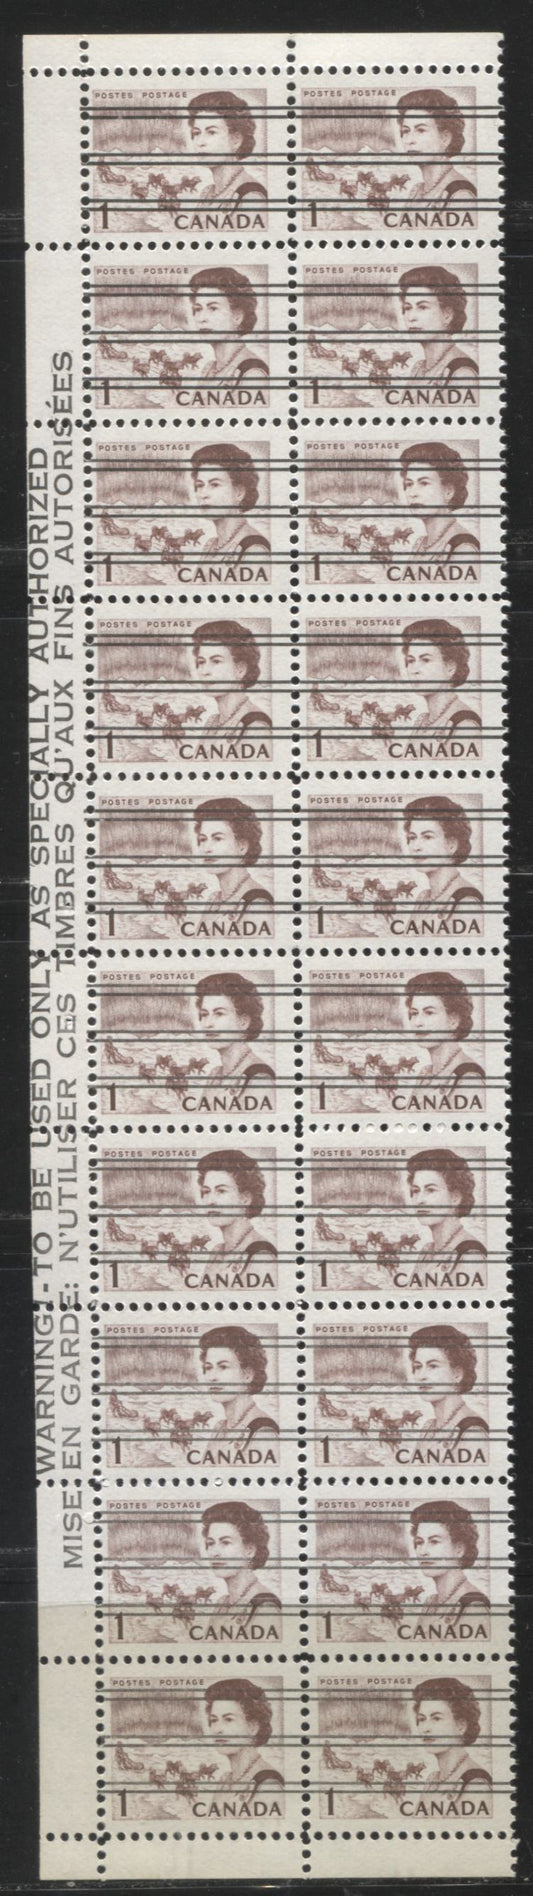 Lot #124 Canada #454xxi 1c Reddish Brown, Northern Lights and Dogsled Team, 1967-1973 Centennial Issue, A Fine NH Precancelled Warning Strip of 20 From the Left Side of the Pane, LF-fl Paper and Perf. 11.85